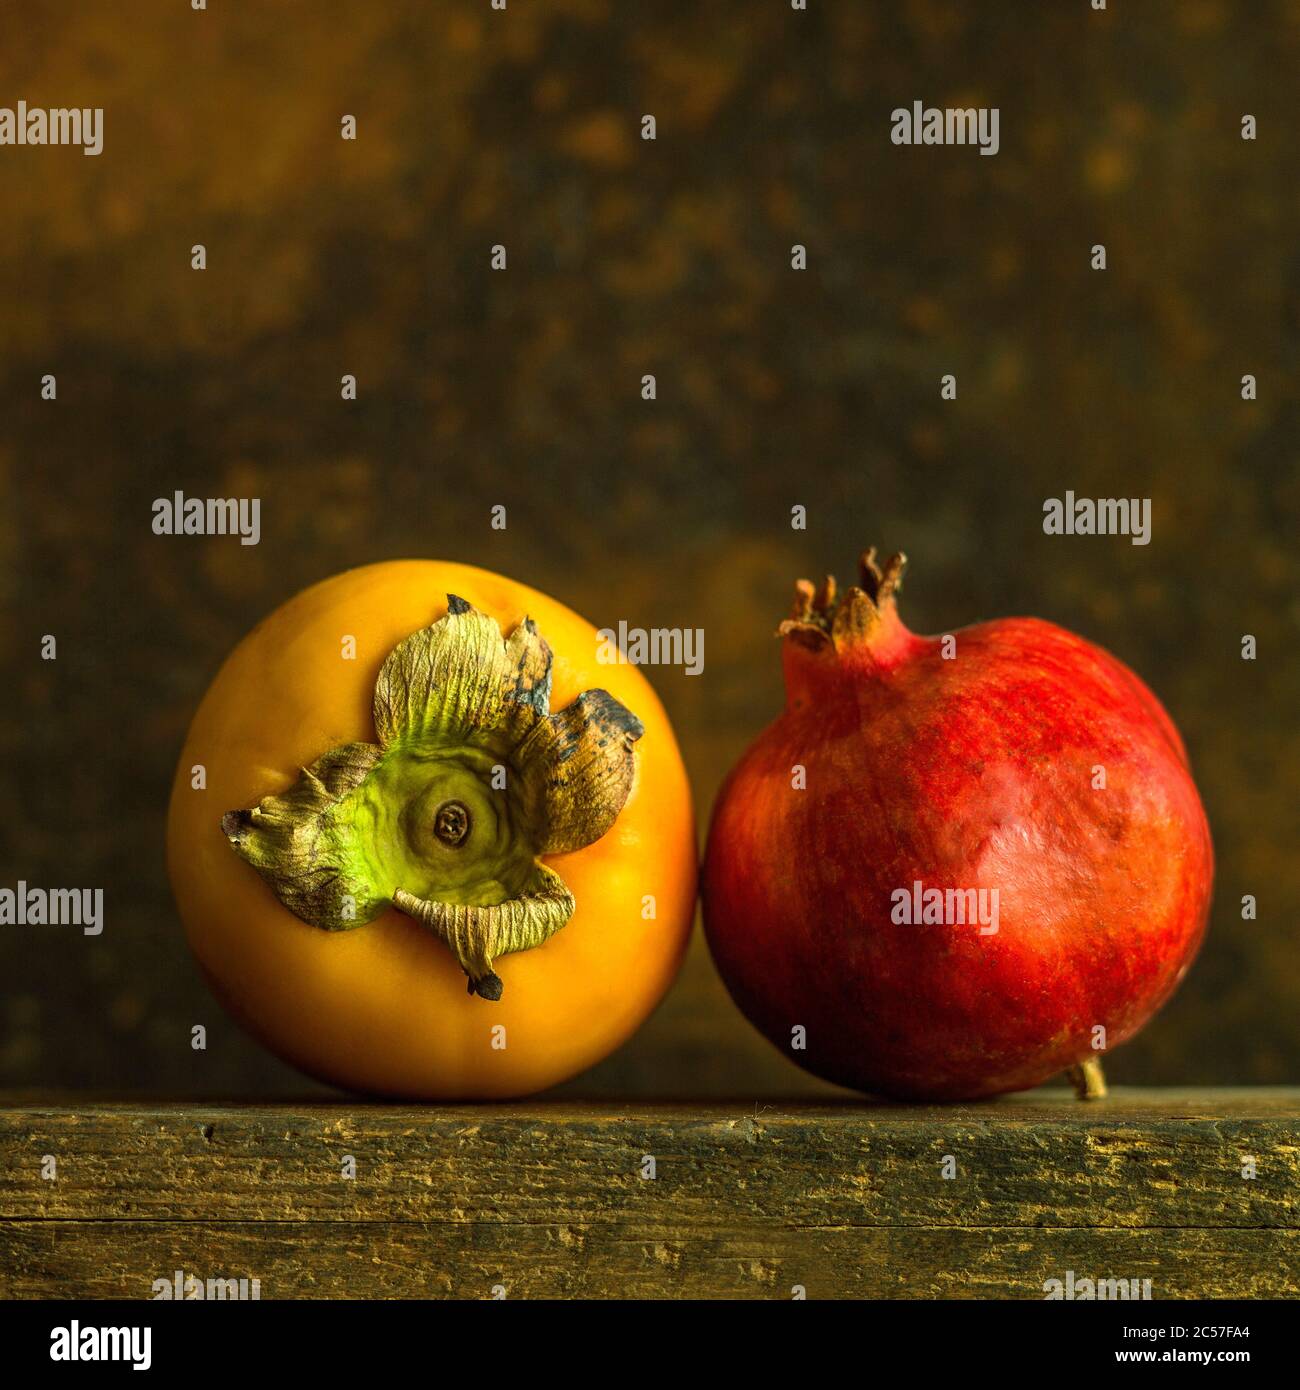 Close-up of persimmons and pomegranate Stock Photo